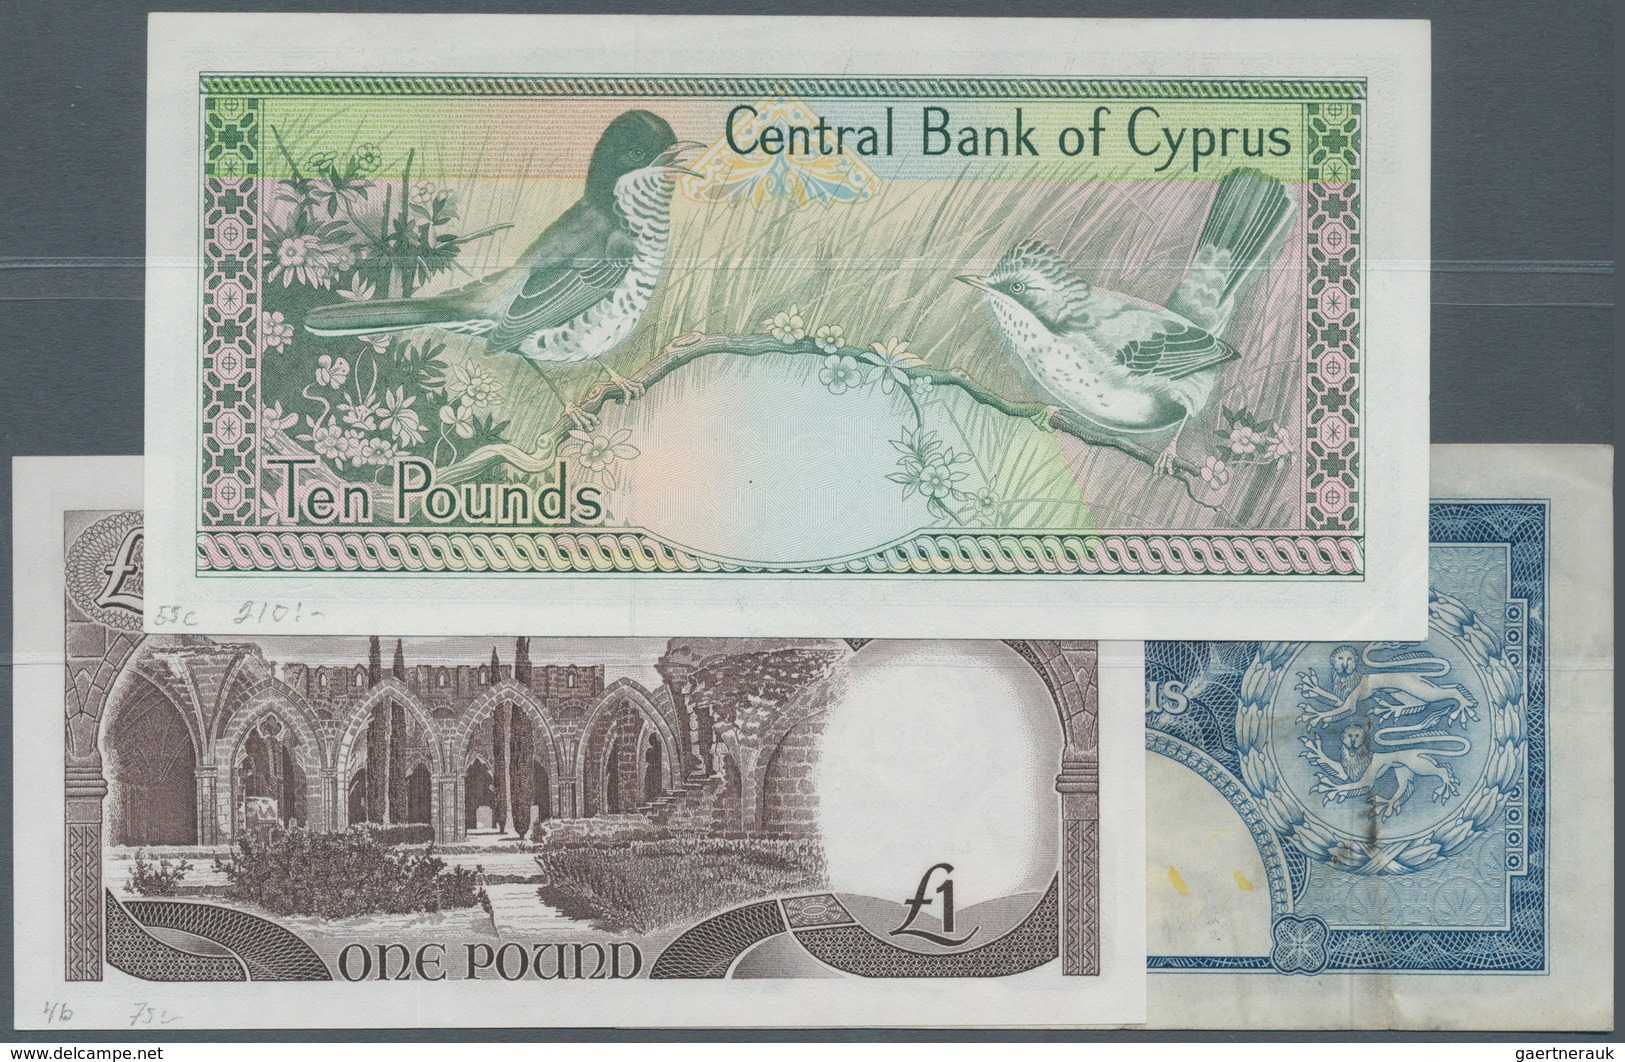 Cyprus / Zypern: Very Nice Set With 3 Banknotes 250 Mils 1955 P.33a In F+, 1 Pound 1979 P.46 In XF A - Chipre